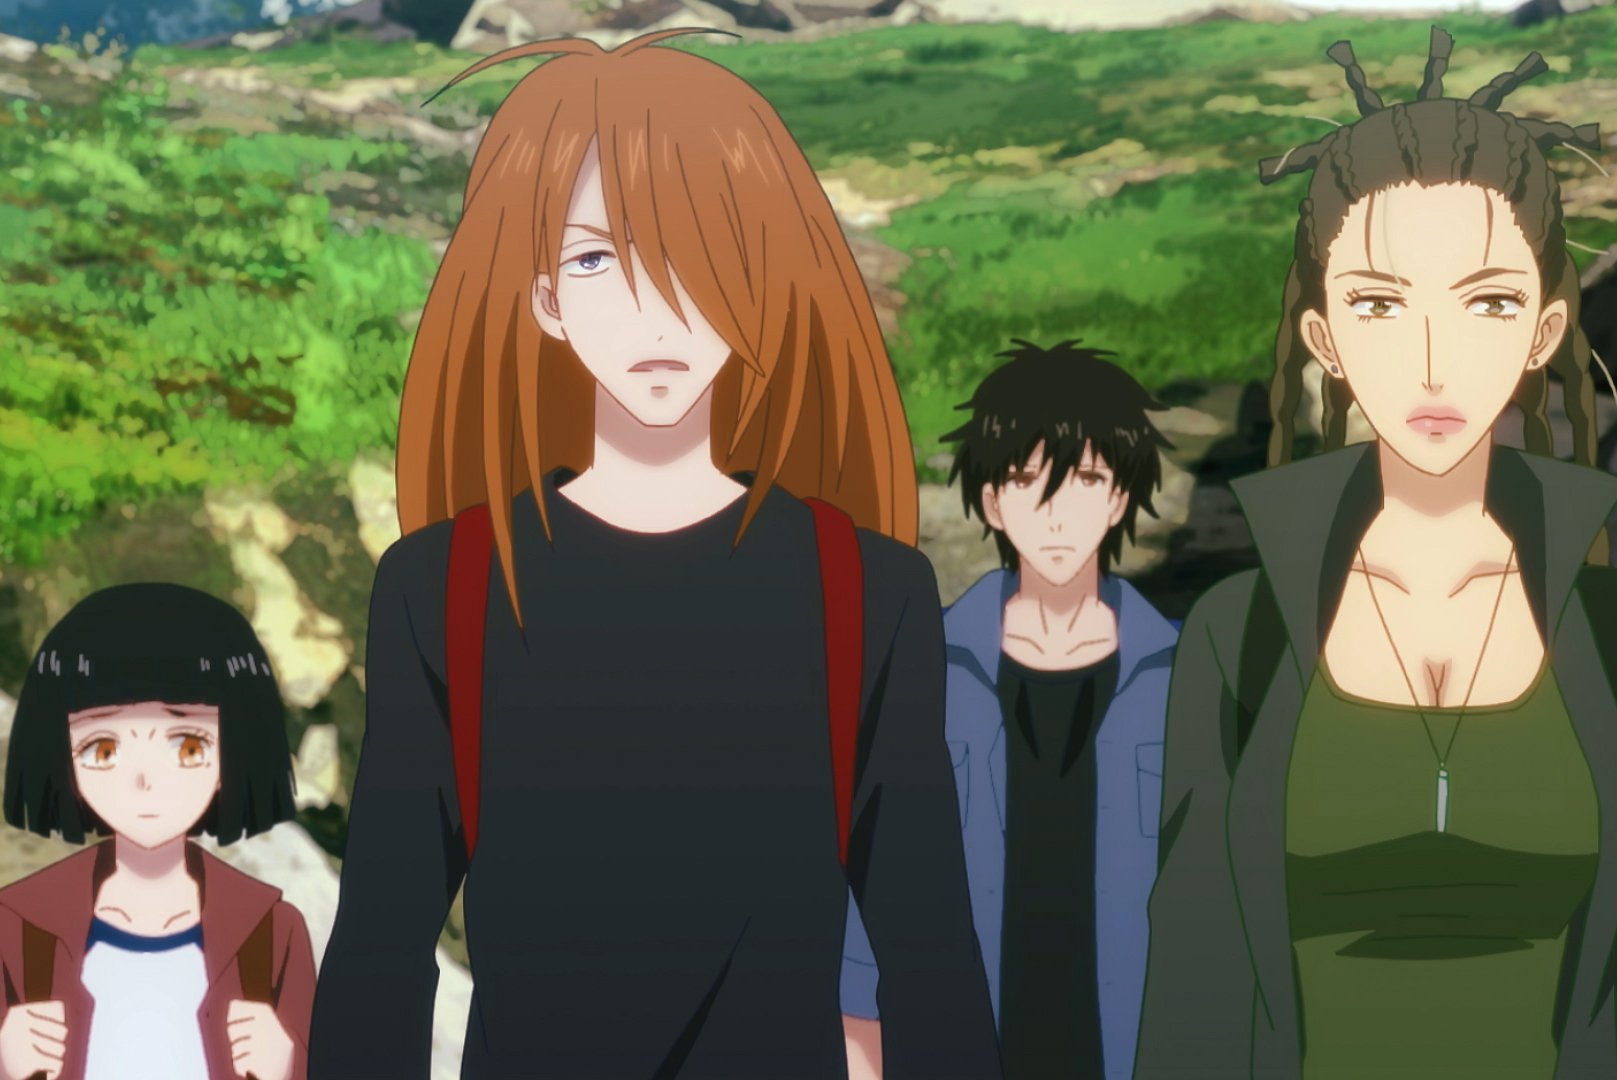 Characters from 7 Seeds stand in front of green mountains, with stern looks on their faces. 